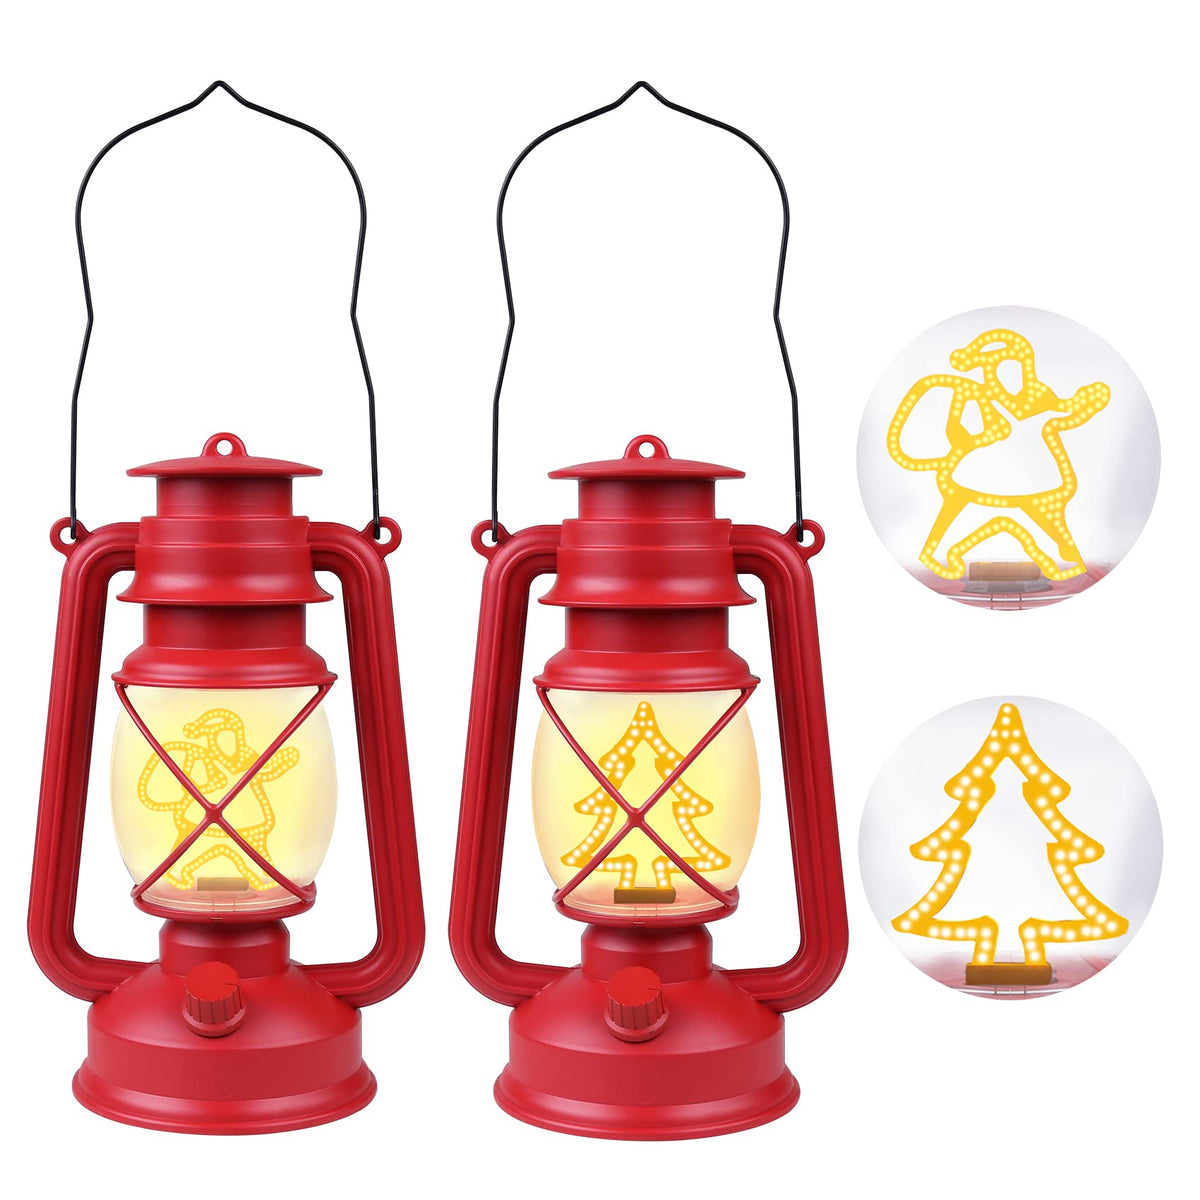 Outdoor Battery Operated Lanterns Flickering Flame or Wired LED Vintage  Lantern Lamp Christmas Halloween Party Table Decorations